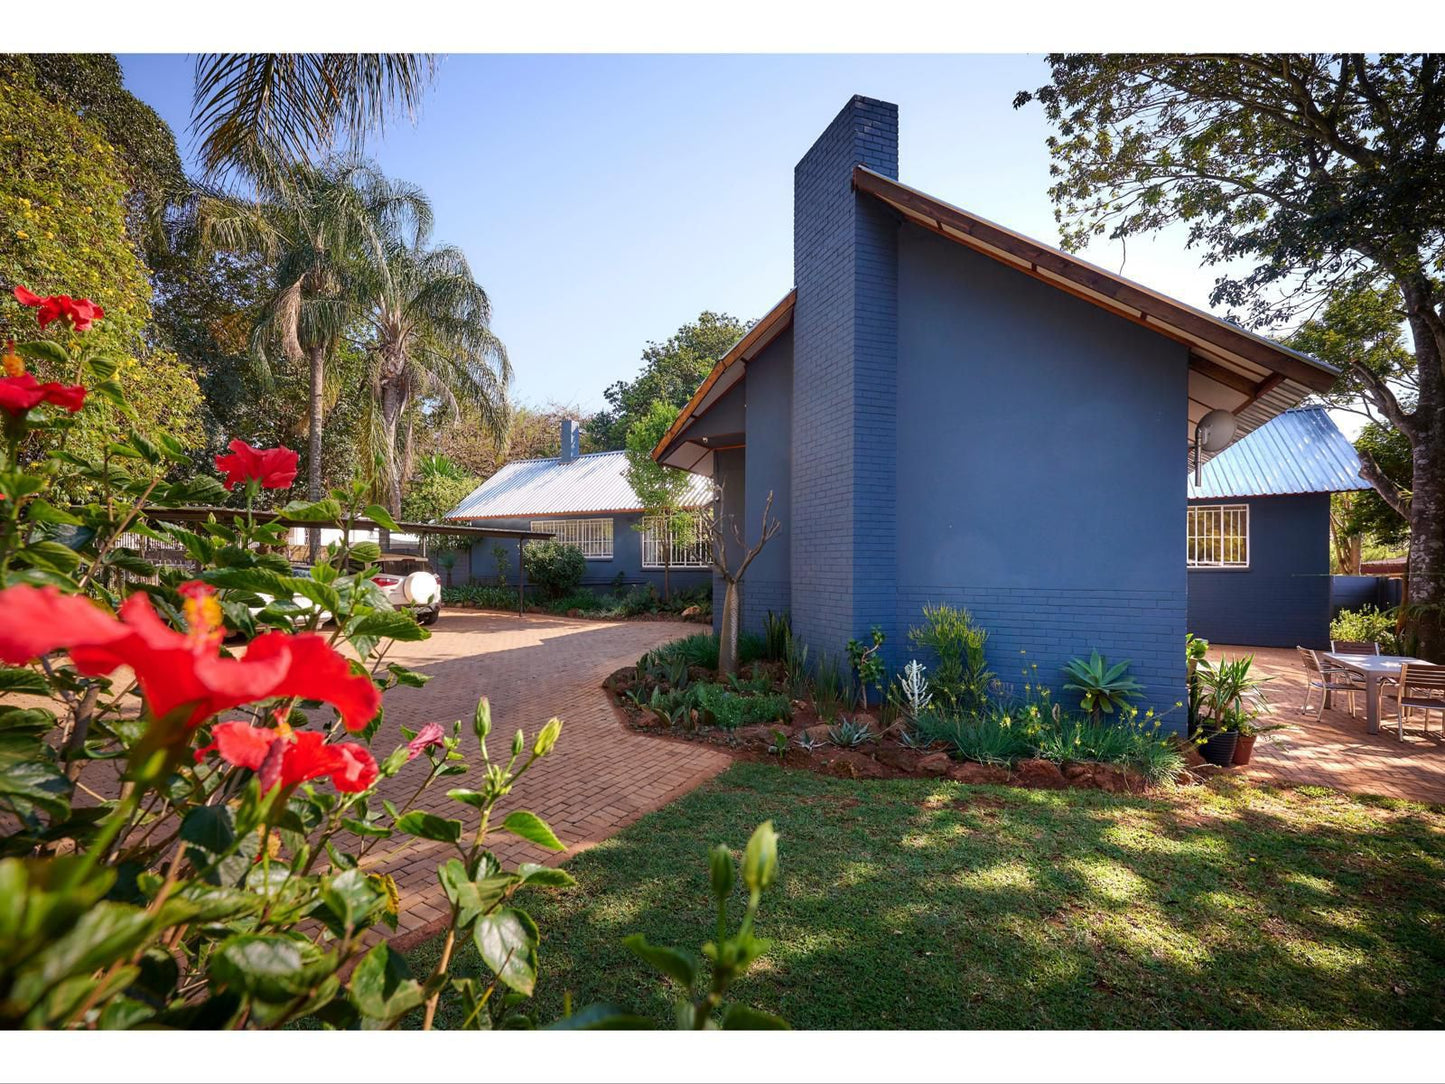 The Beekeeper S Inn Makhado Louis Trichardt Limpopo Province South Africa Complementary Colors, House, Building, Architecture, Palm Tree, Plant, Nature, Wood